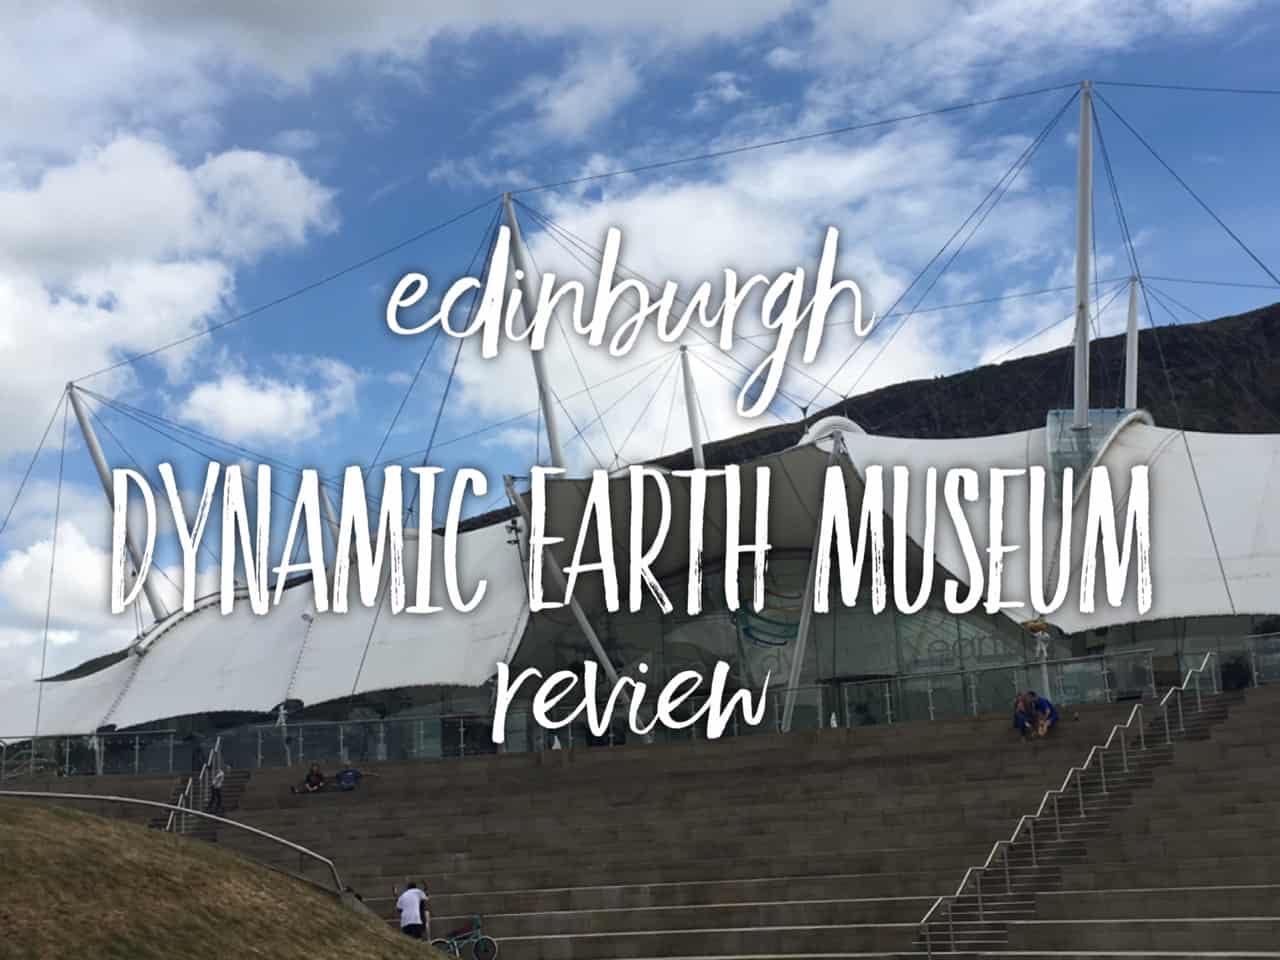 Edinburgh Dynamic Earth - one of the best interactive museums in the world